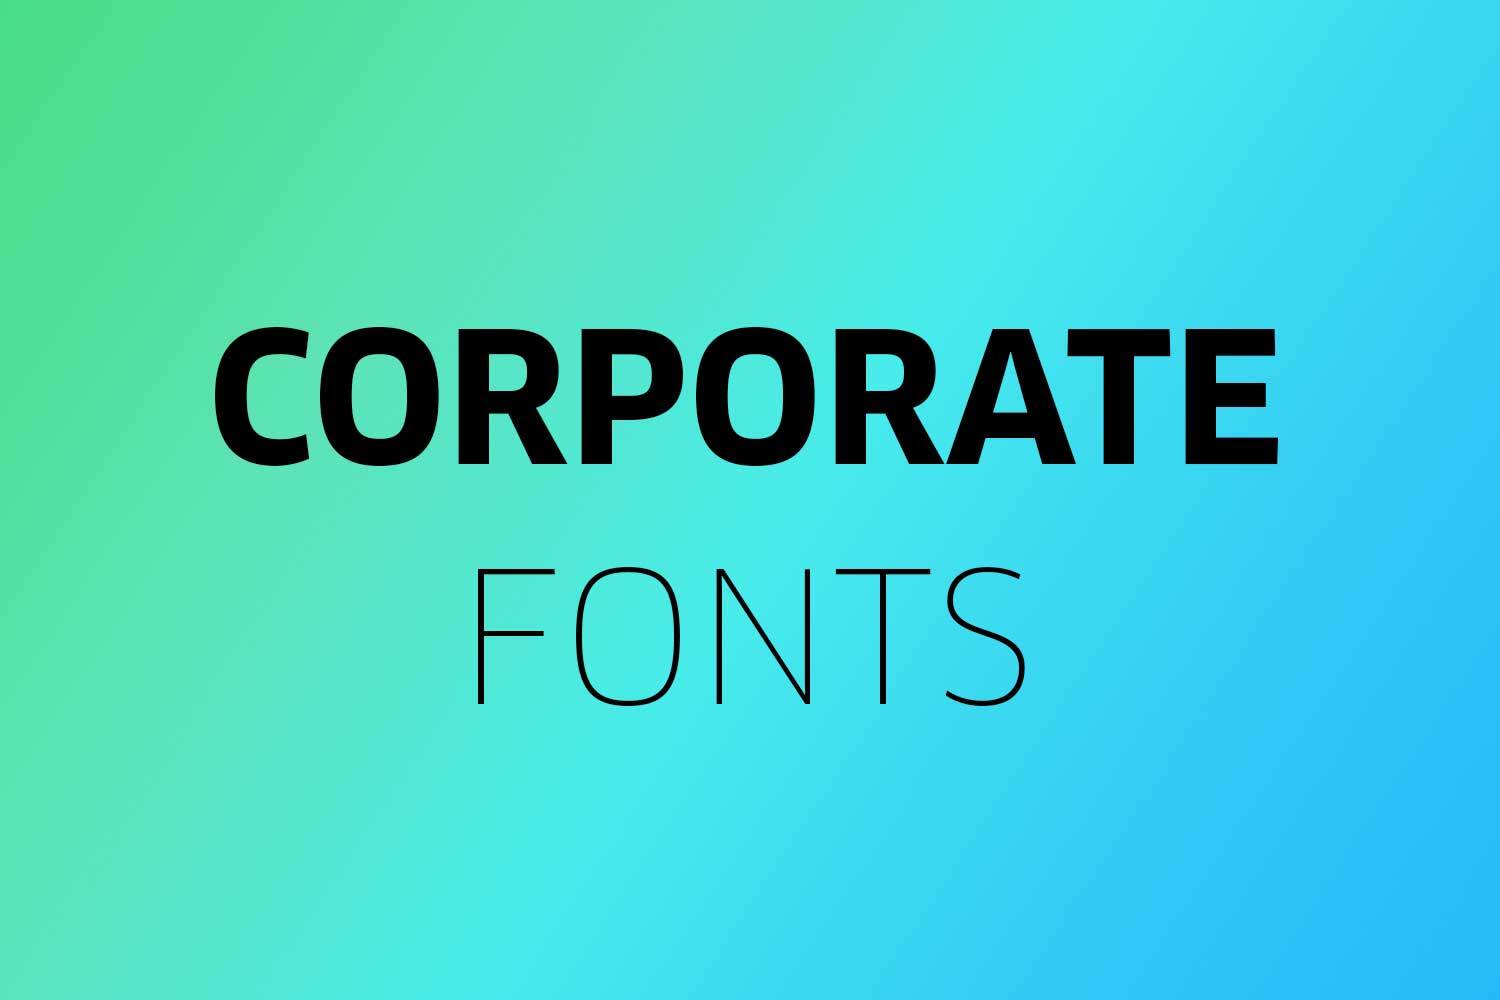 /images/content/blog/Corporate-Fonts.jpg